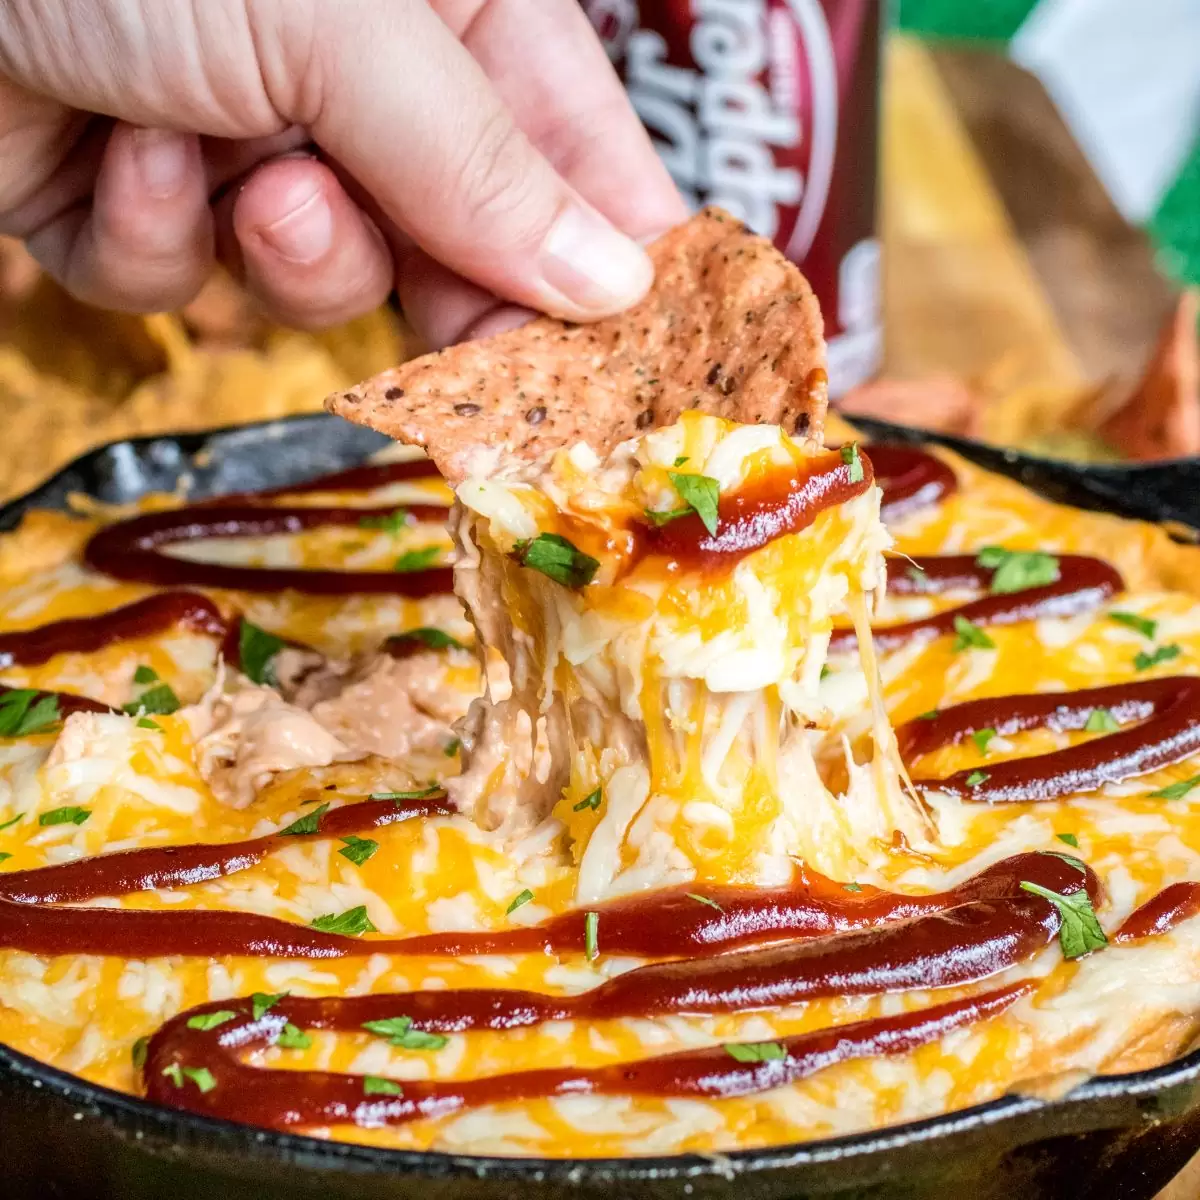 Chip scooping up Dr Pepper BBQ chicken dip.